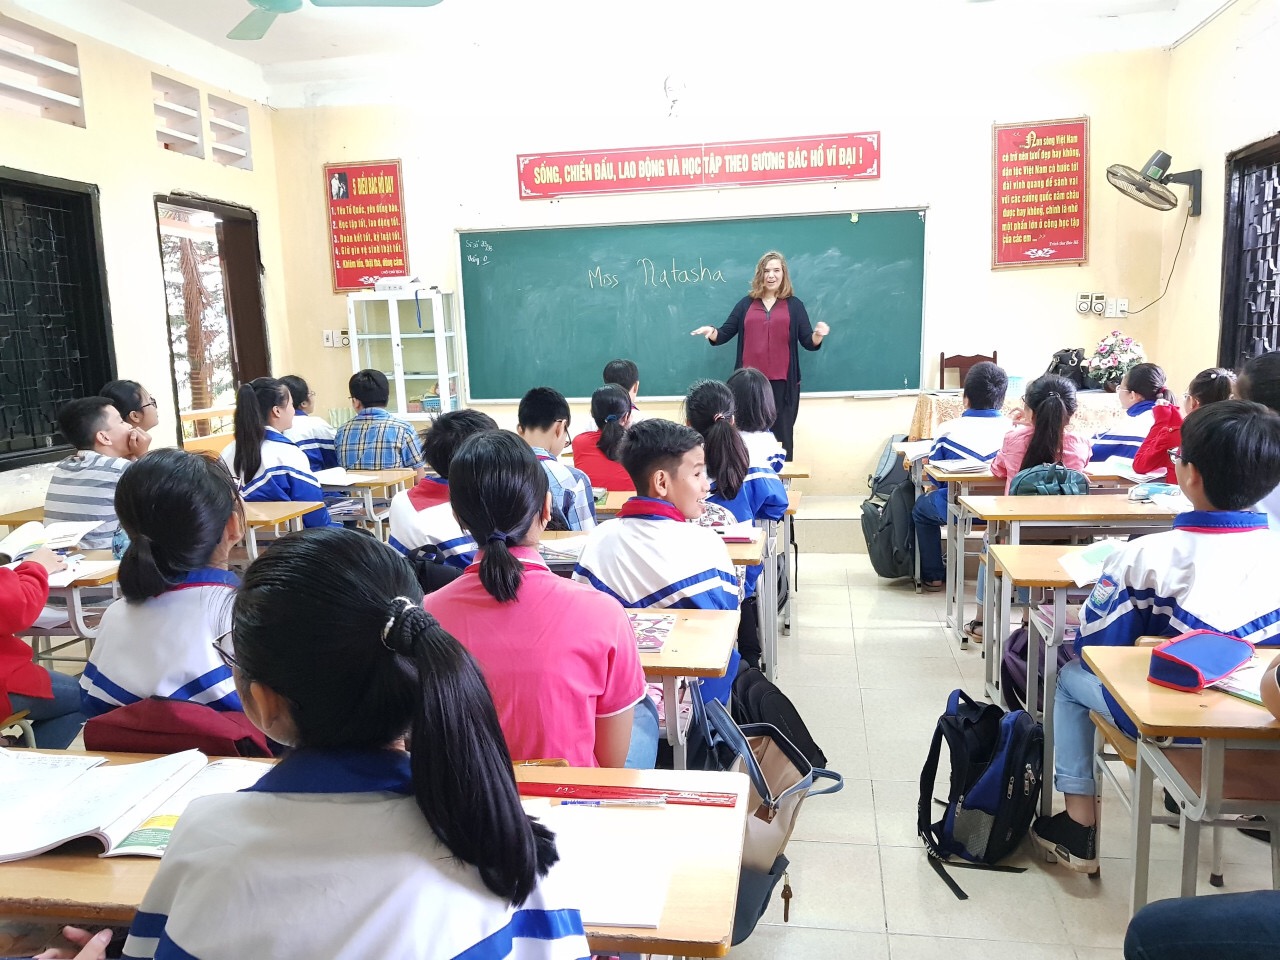 A woman teaching a class of students at desks